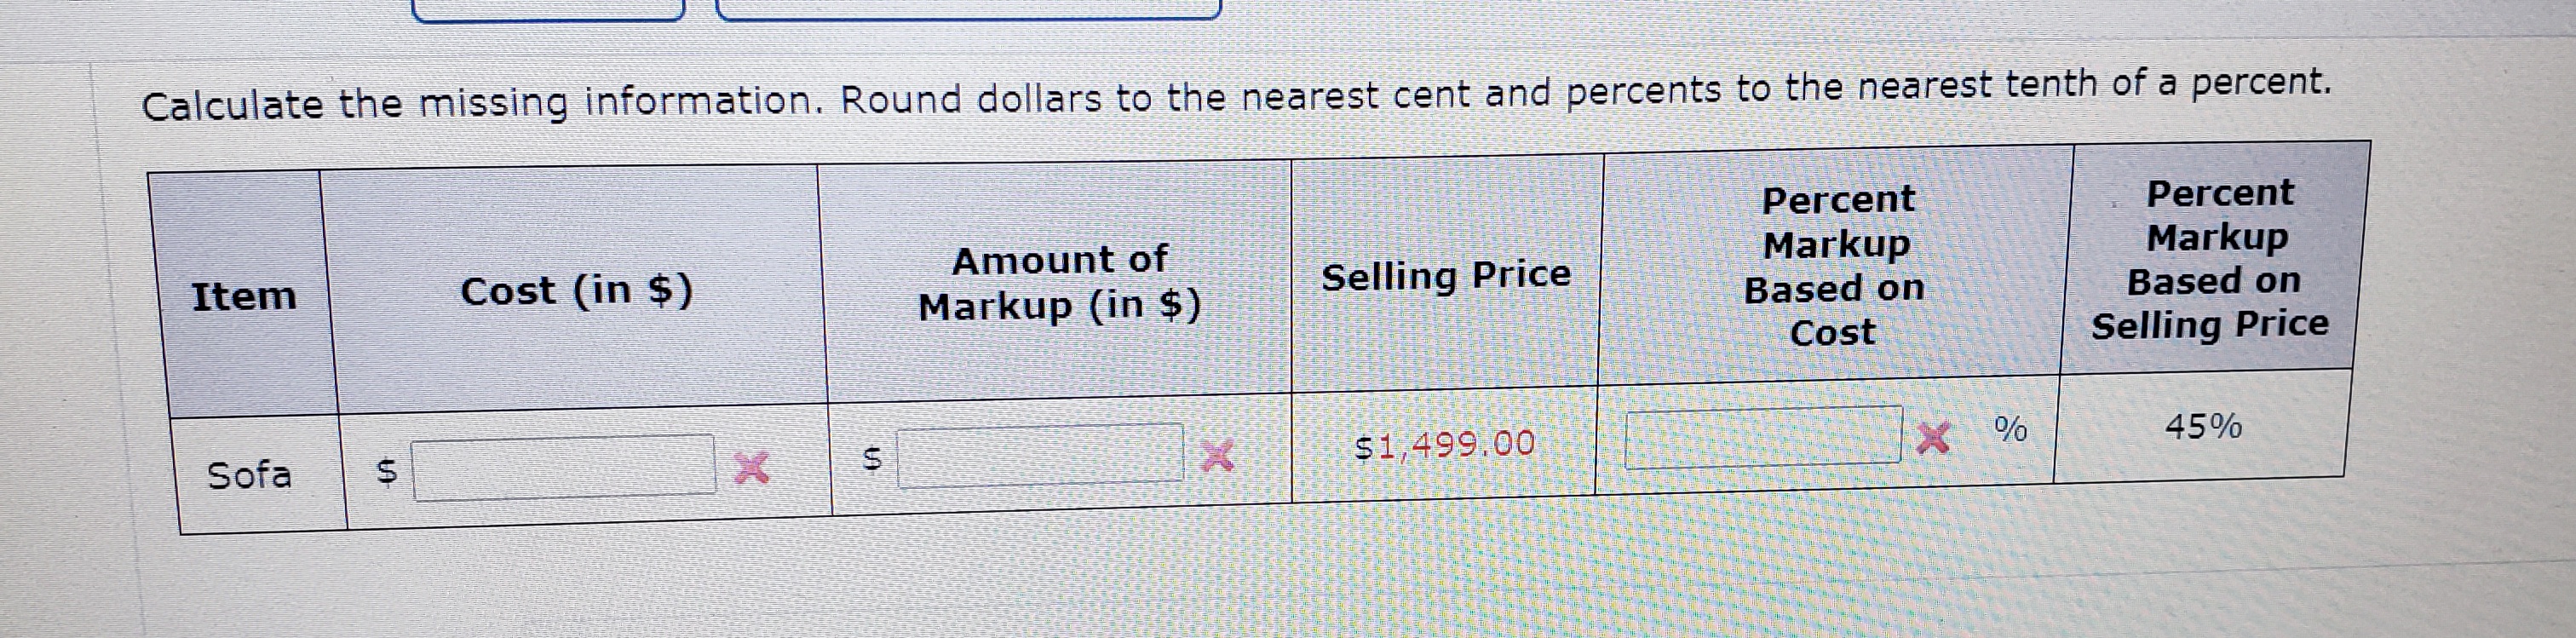 Calculate the missing information. Round dollars to the nearest cent and percents to the nearest tenth of a percent.
Percent
Percent
Markup
Markup
Based on
Amount of
Item
Cost (in $)
Selling Price
Based on
Markup (in $)
Cost
Selling Price
45%
$1499.00
%
Sofa
S4
